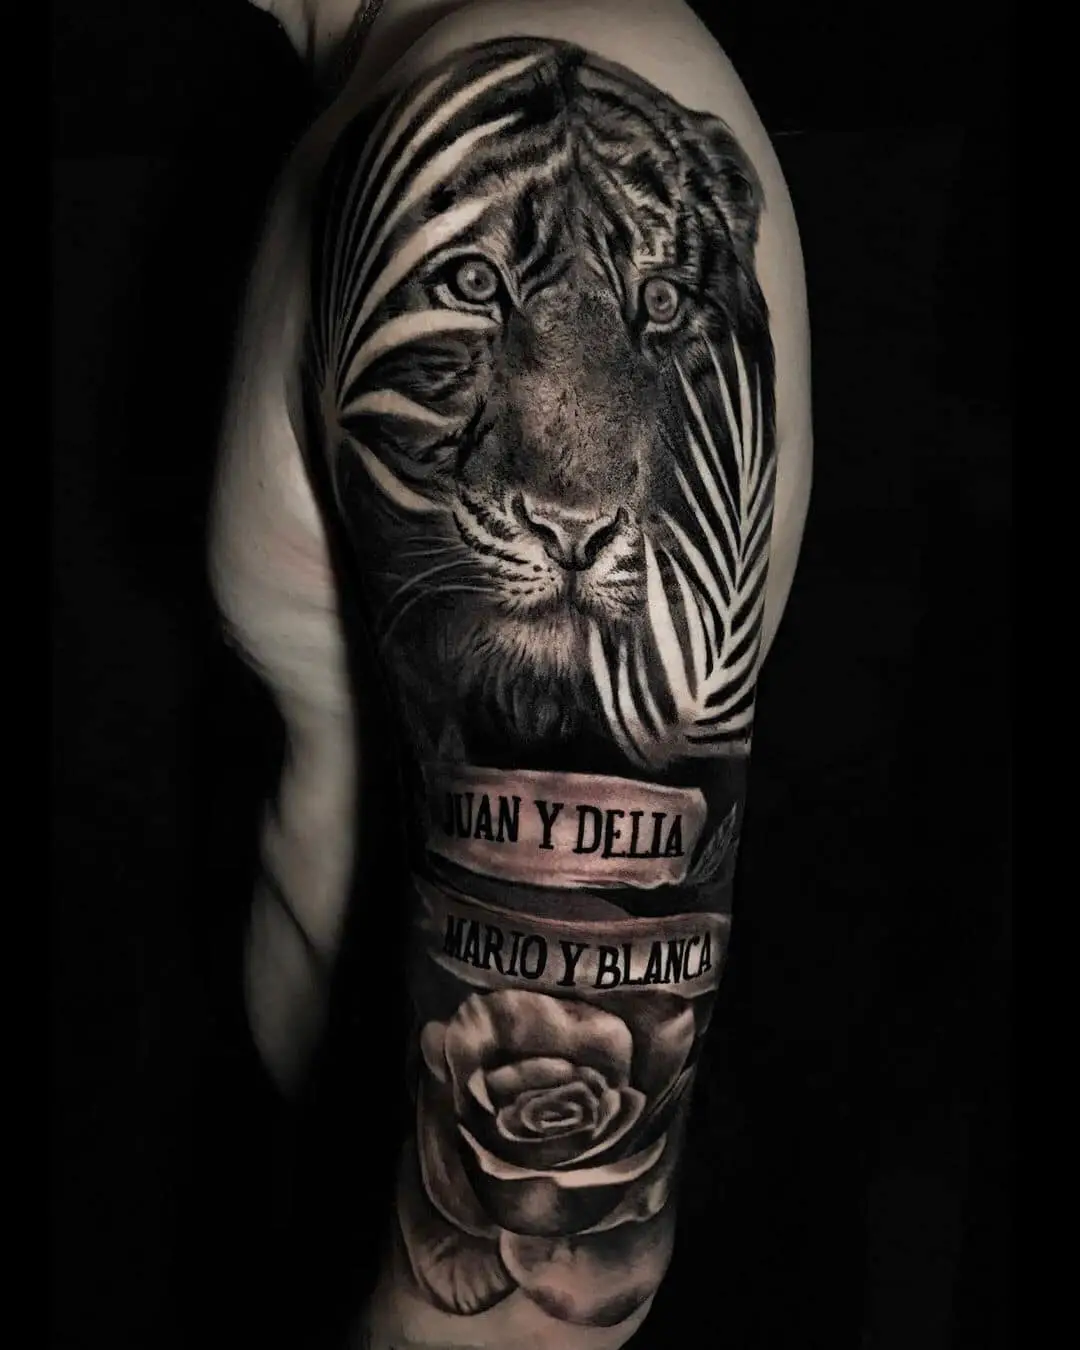 Forearm Tiger tattoo women at theYou.com